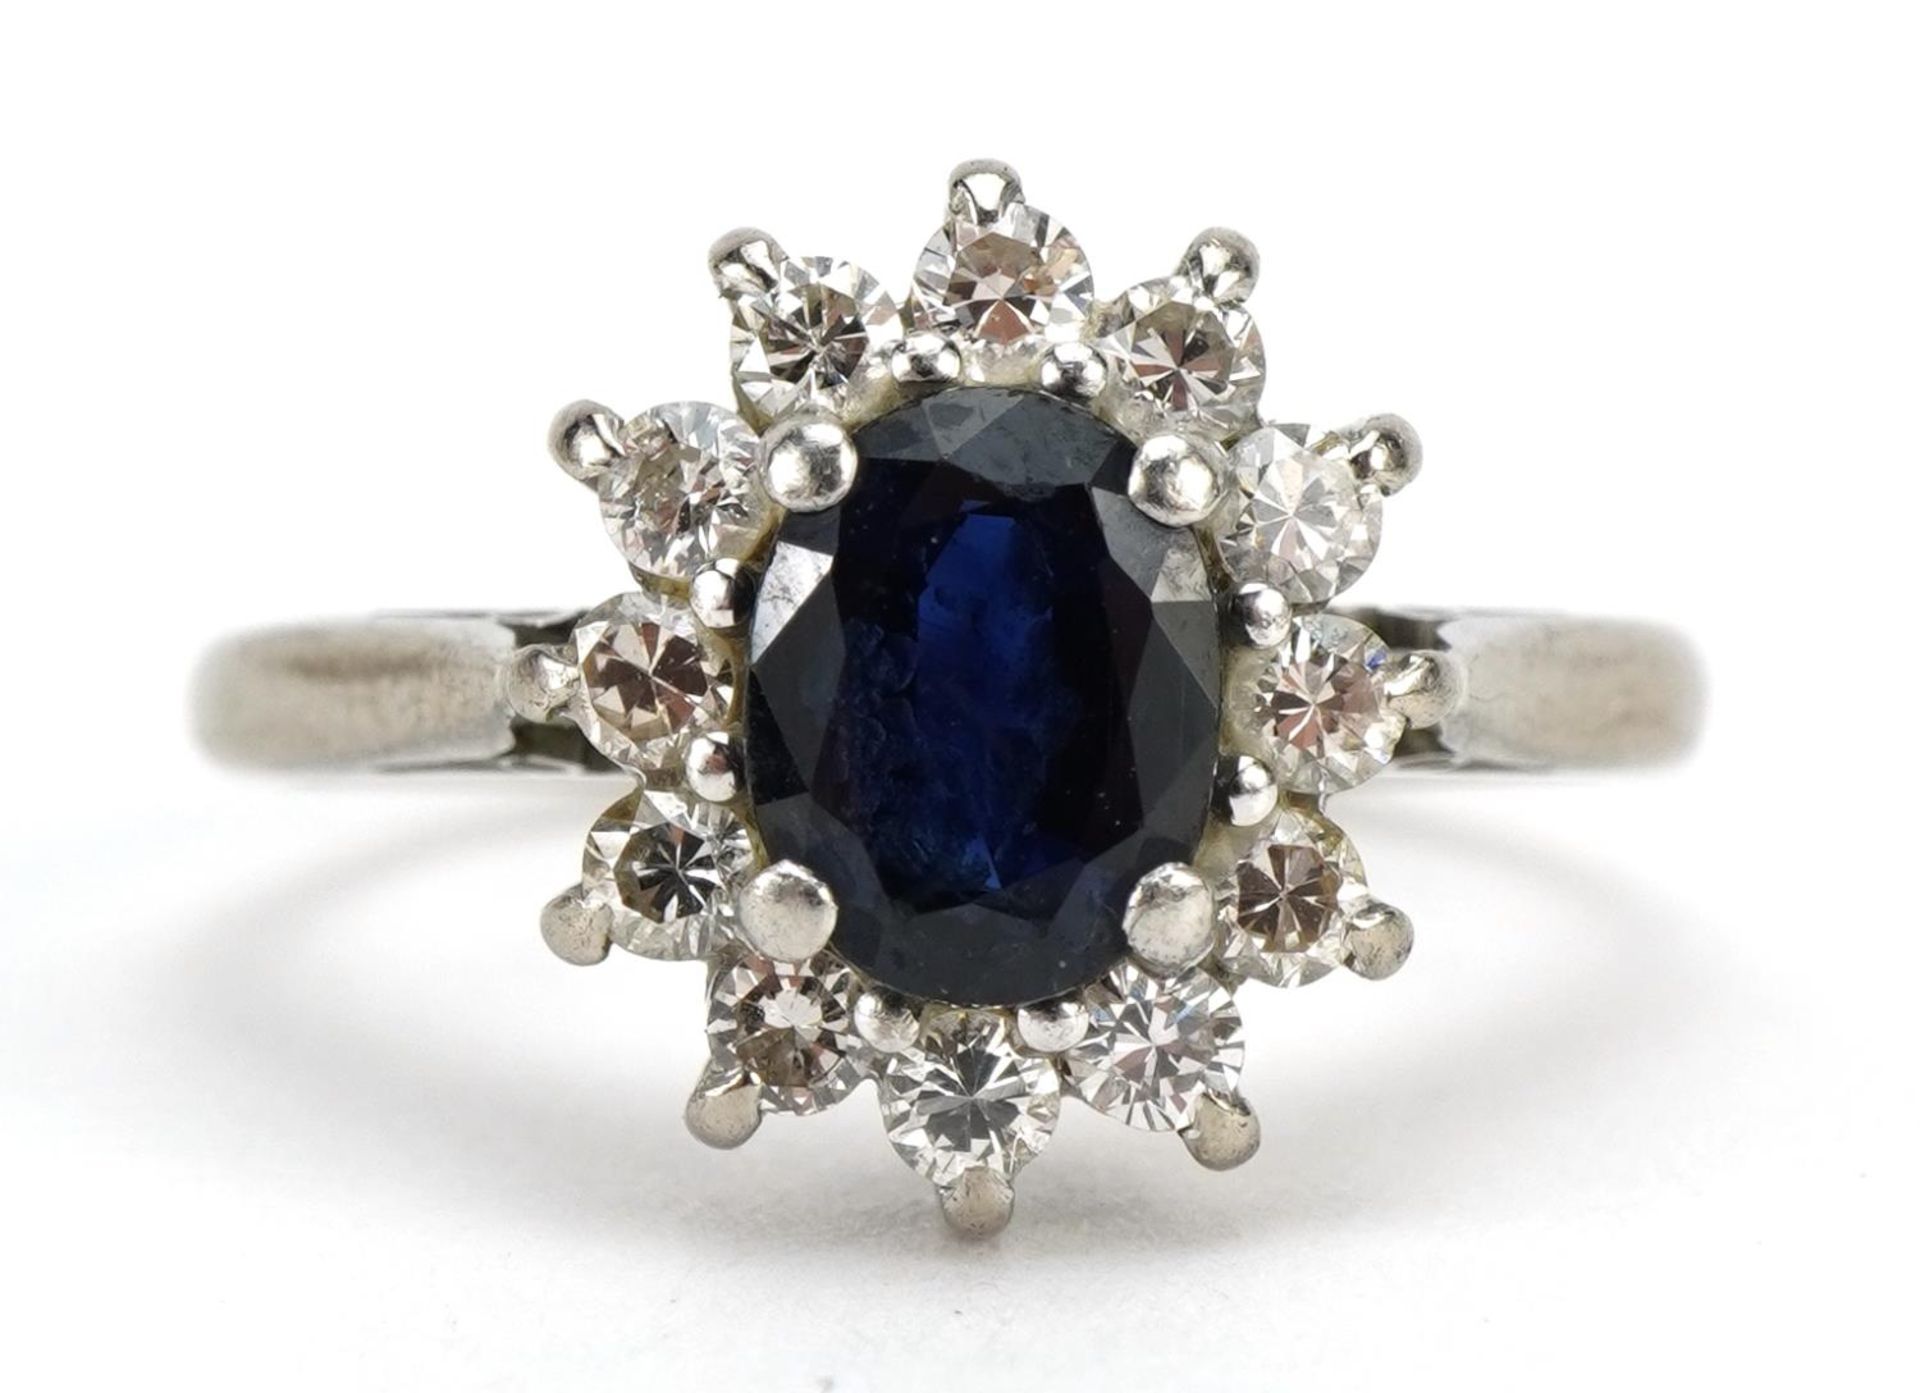 18ct white gold and platinum sapphire and diamond cluster ring, the sapphire approximately 6.8mm x